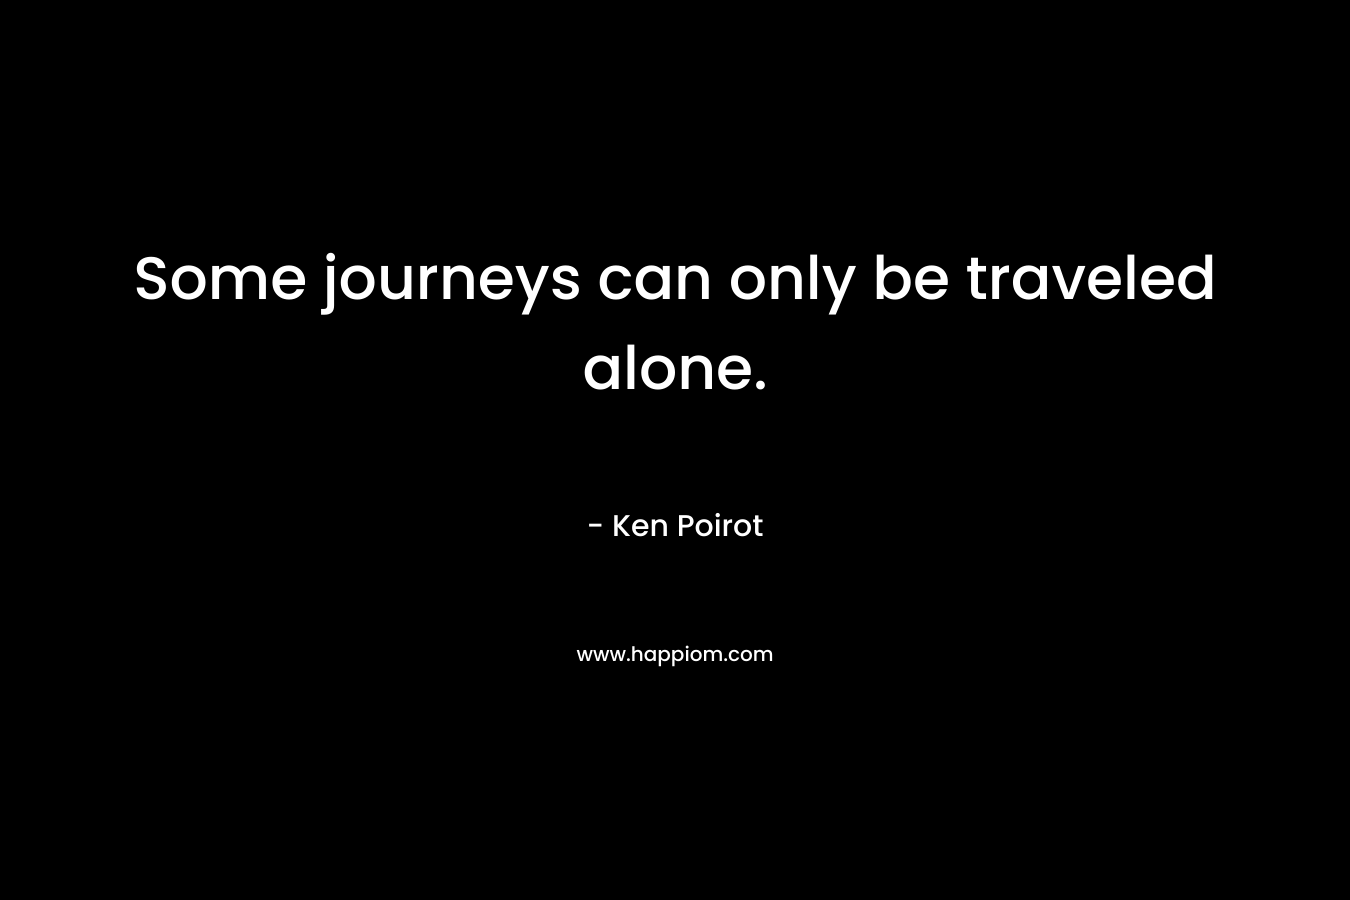 Some journeys can only be traveled alone. – Ken Poirot